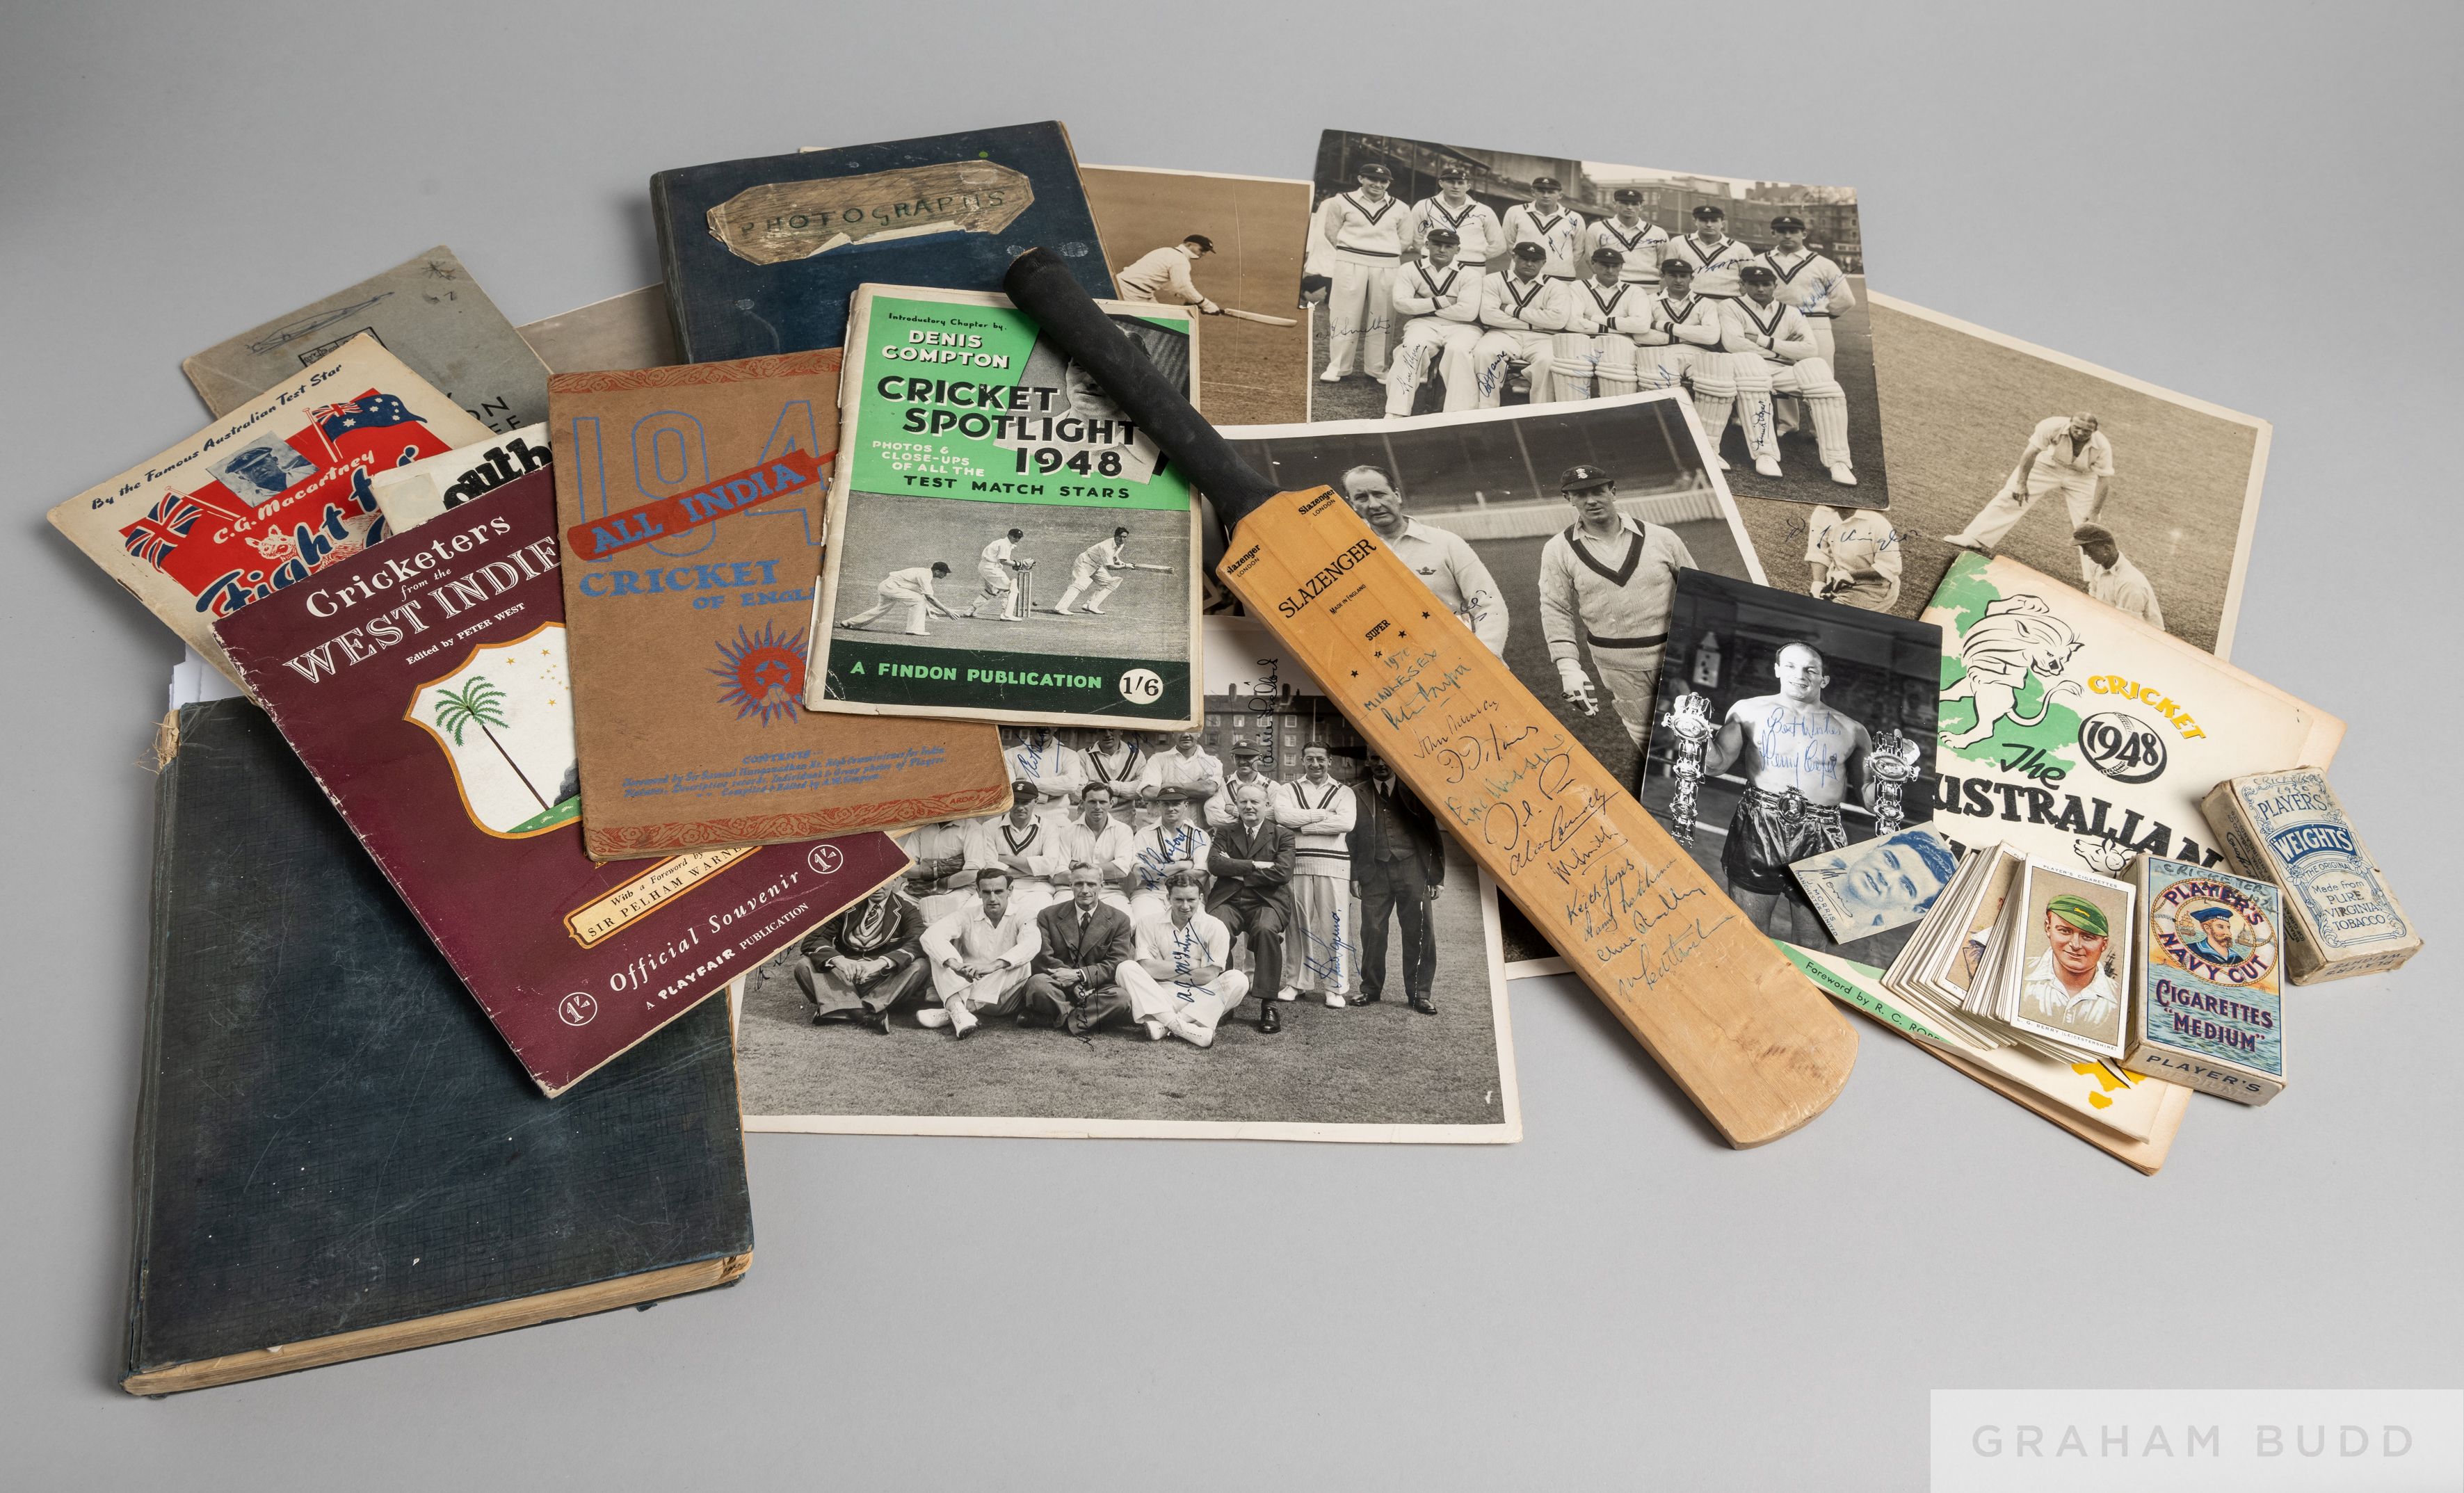 An extensive collection of cricket autographs